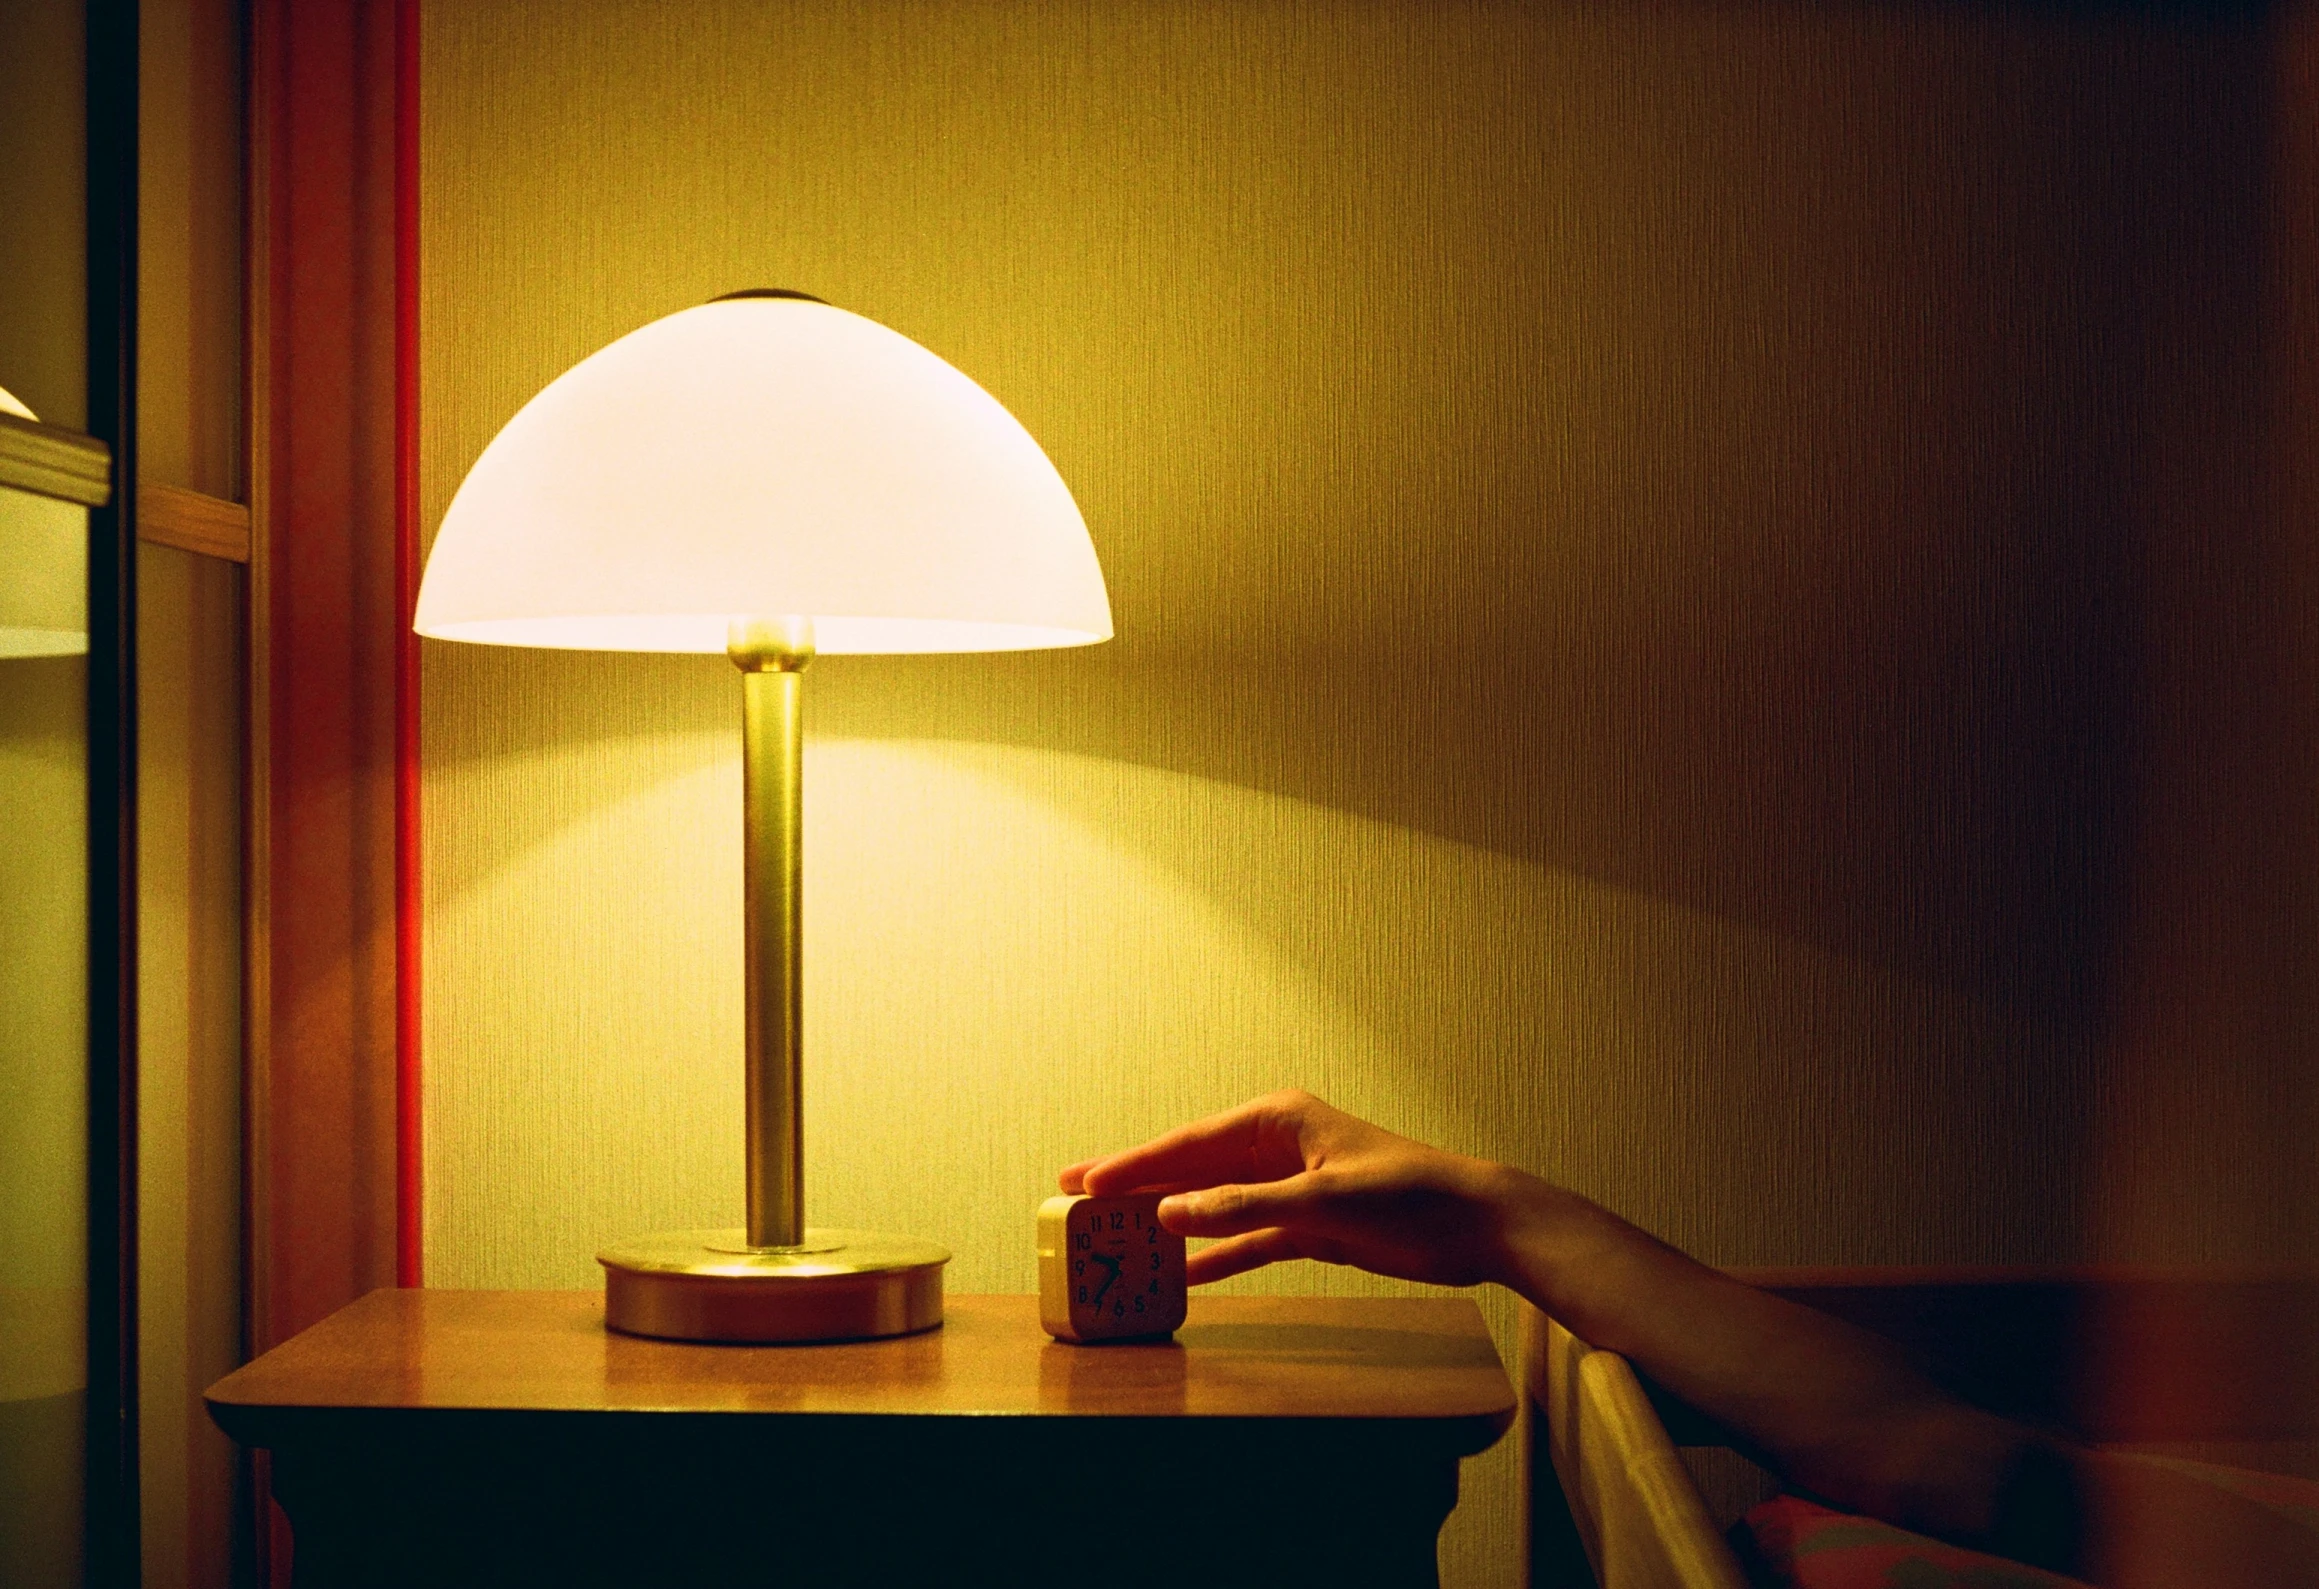 someone holding onto a lamp next to a wooden table